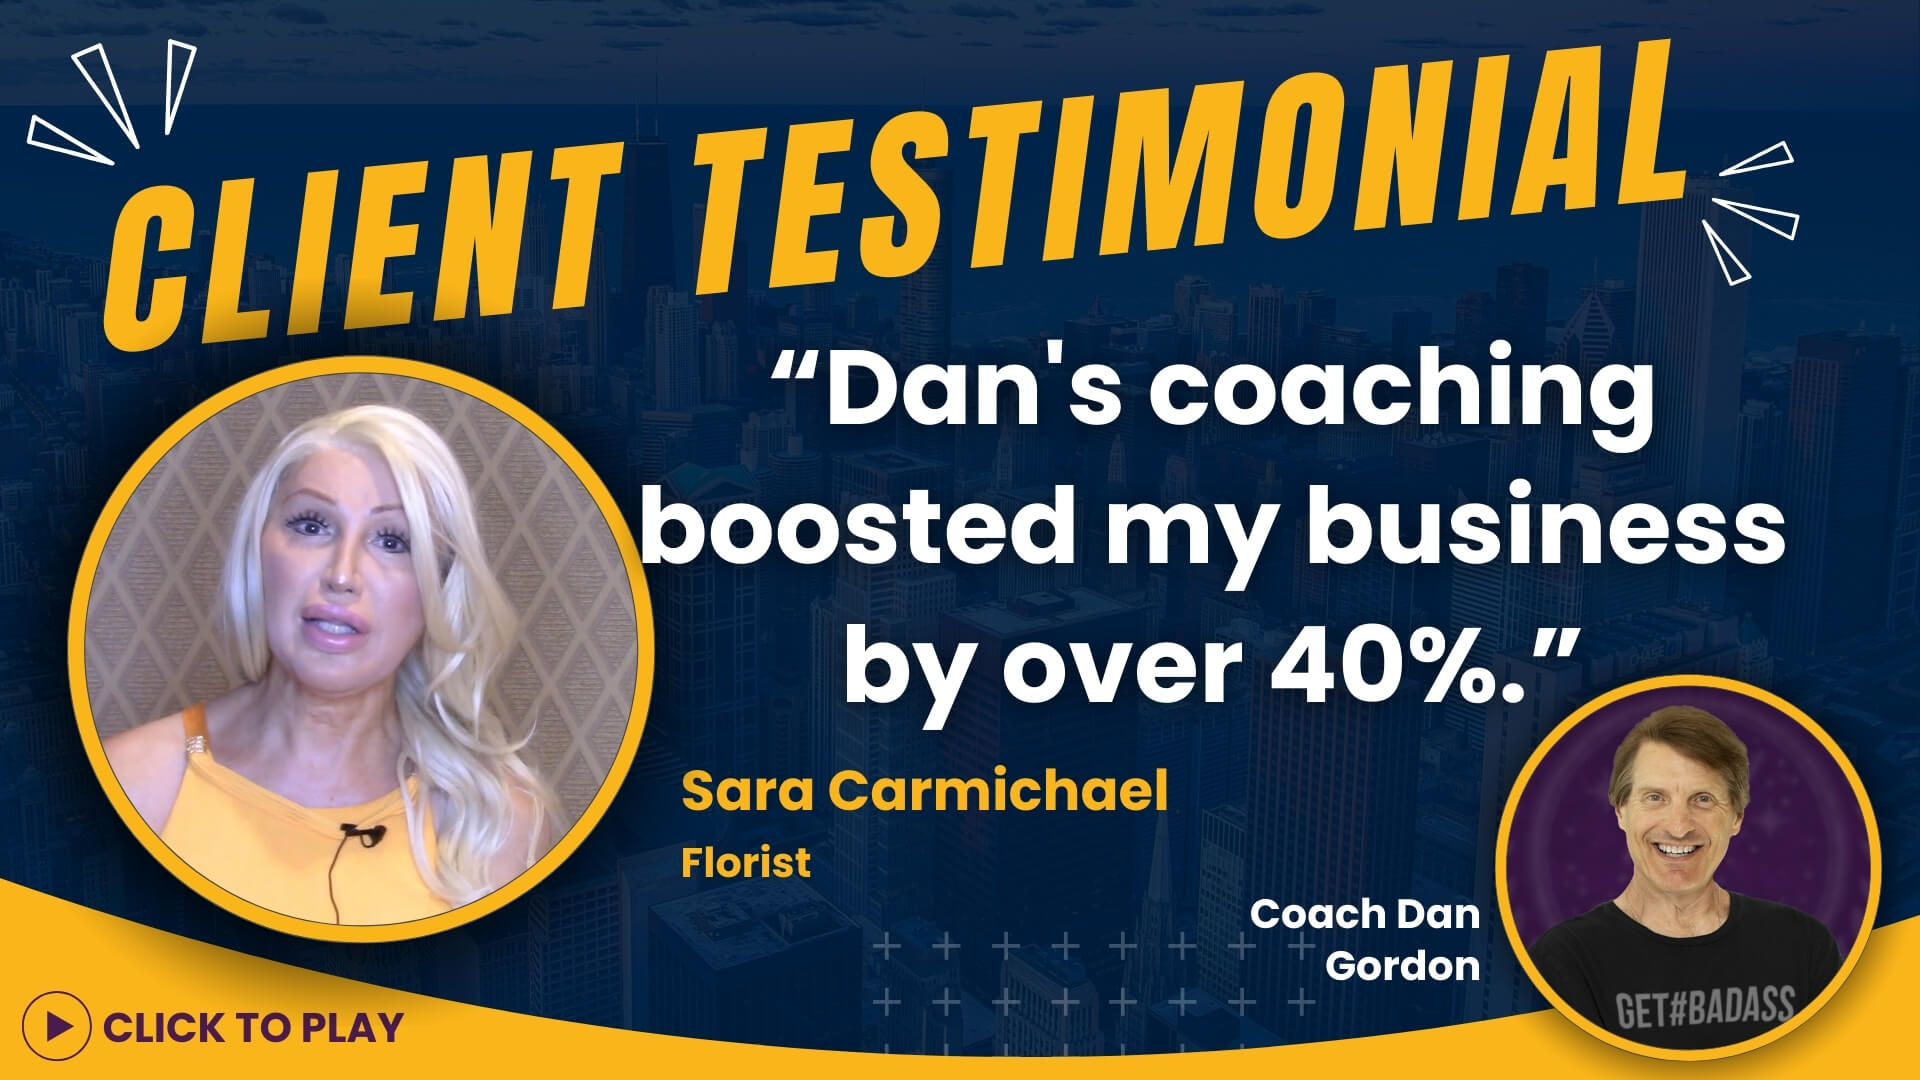 Video testimonial thumbnail showing florist Sara Carmichael, crediting Coach Dan Gordon for a significant boost in her business.